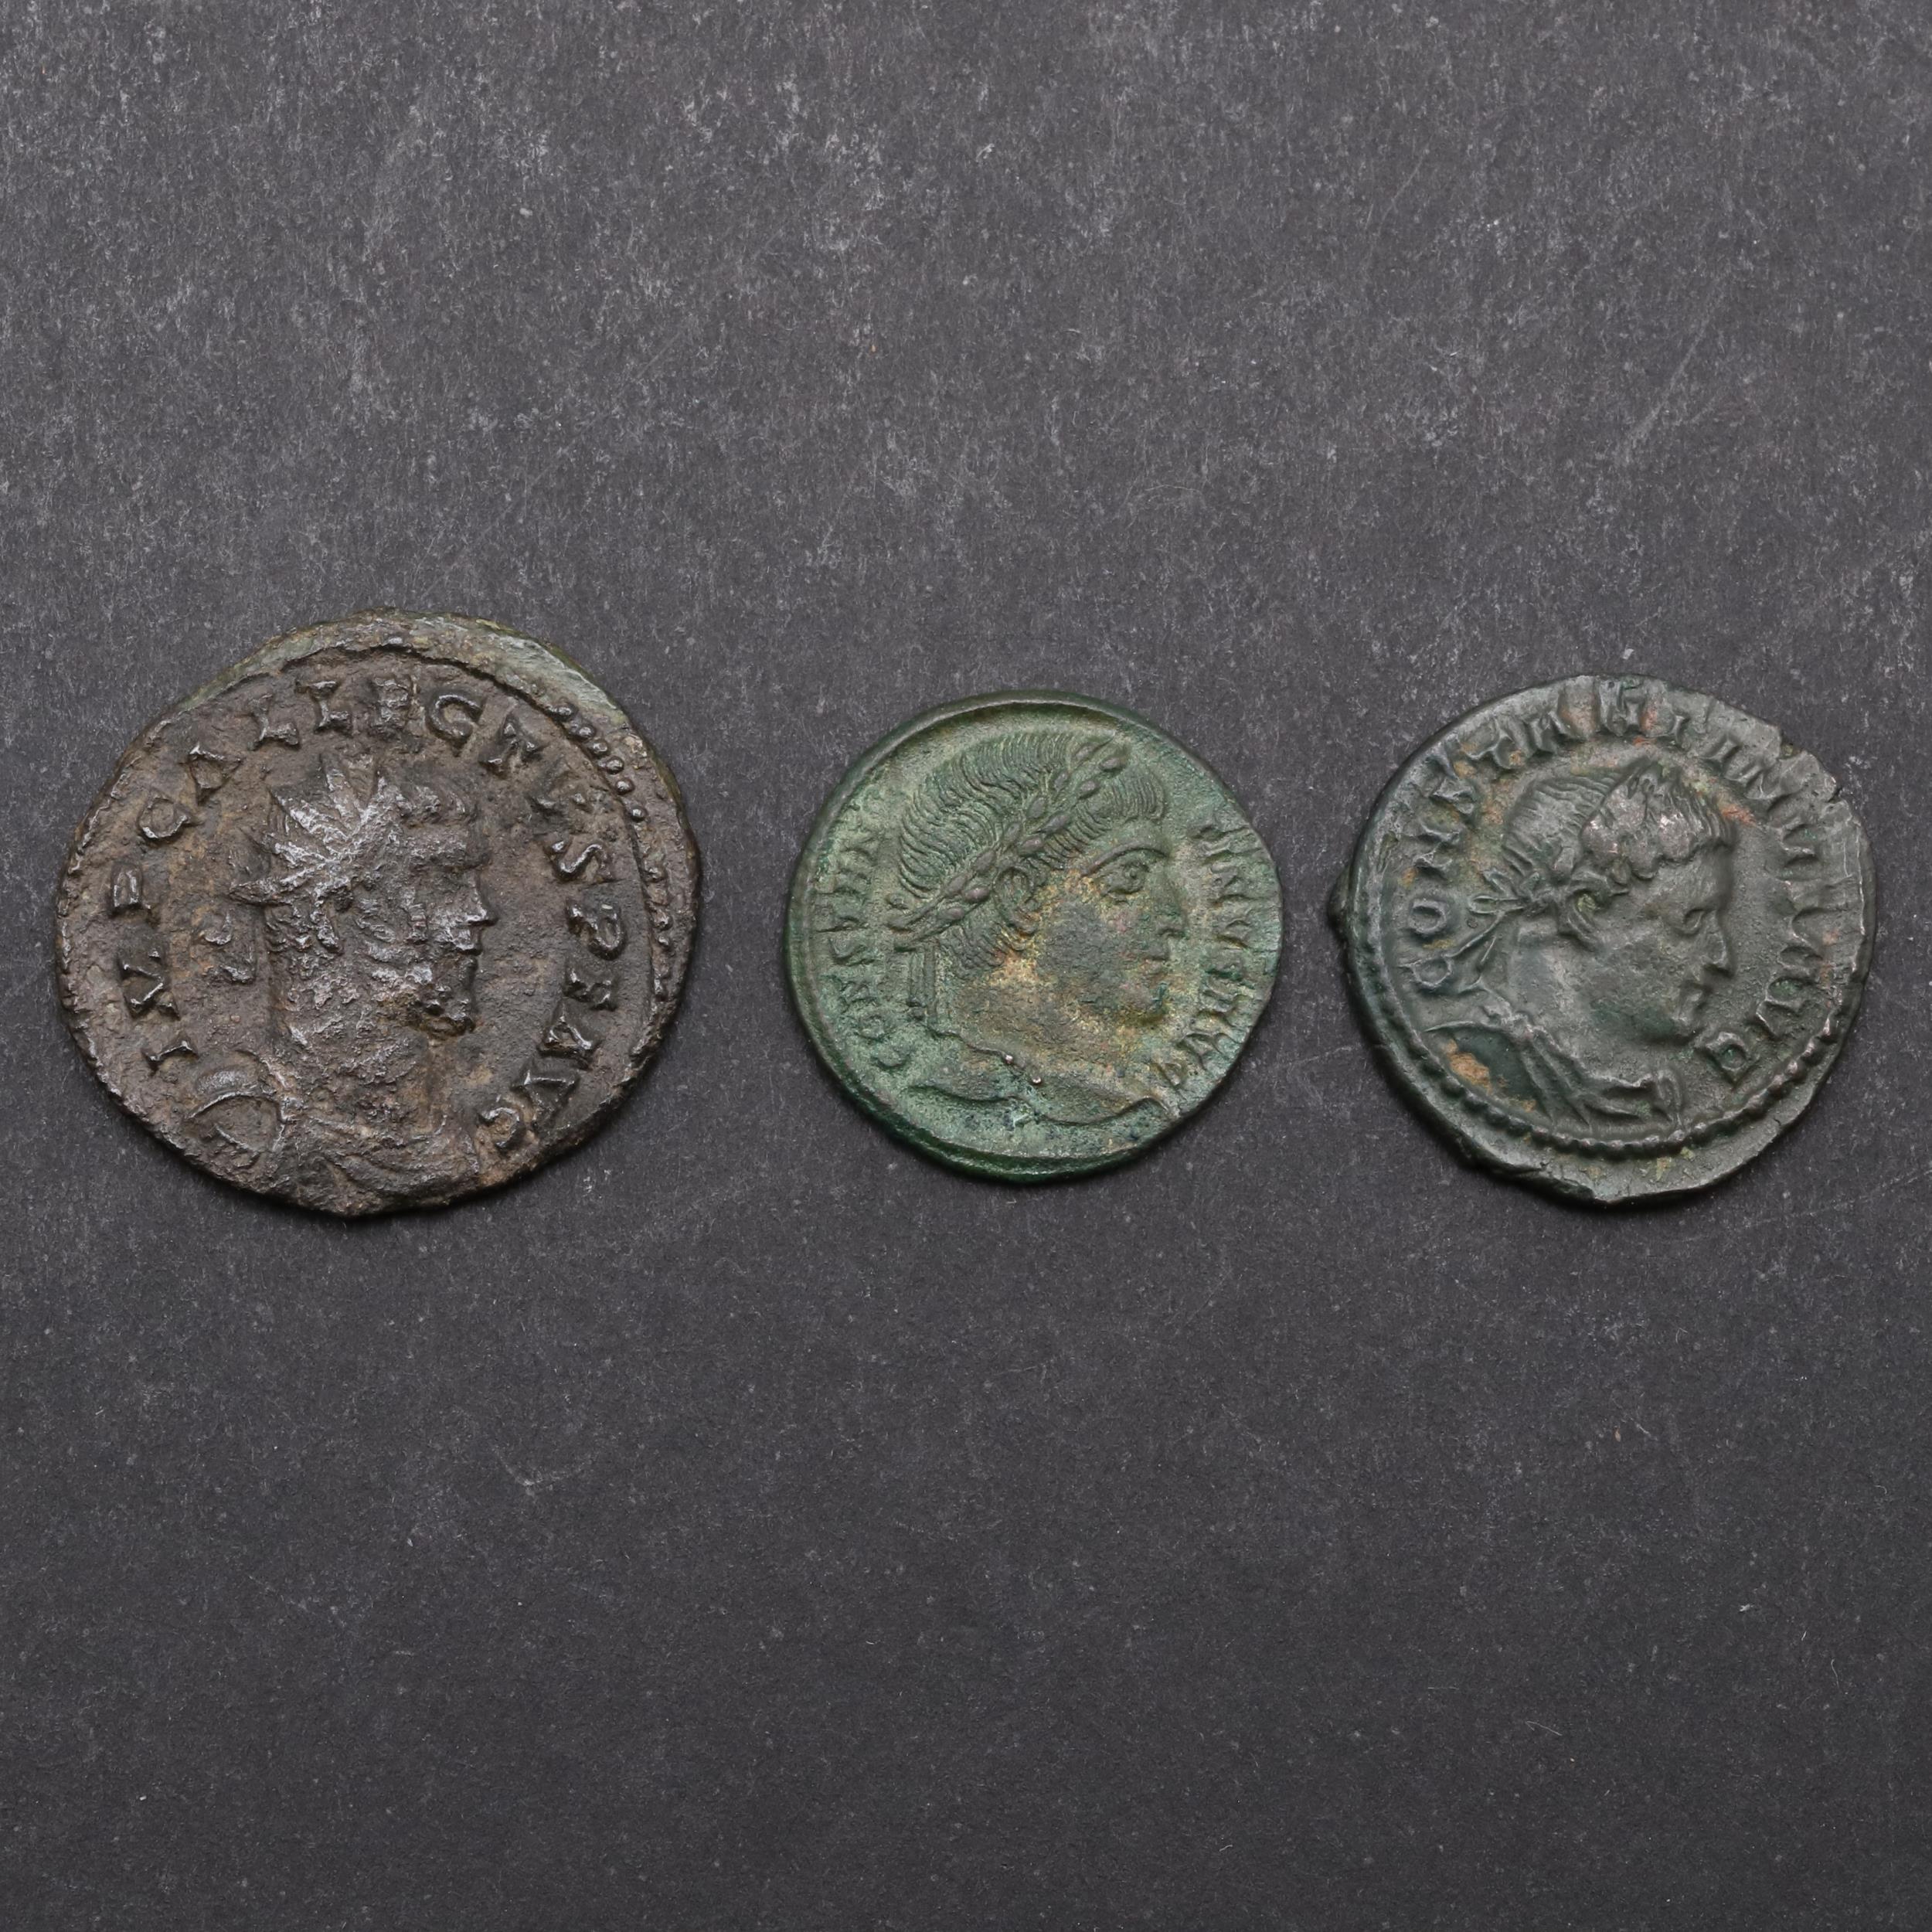 ROMAN IMPERIAL COINAGE: A RADIATE OF ALLECTUS AND TWO OTHERS.